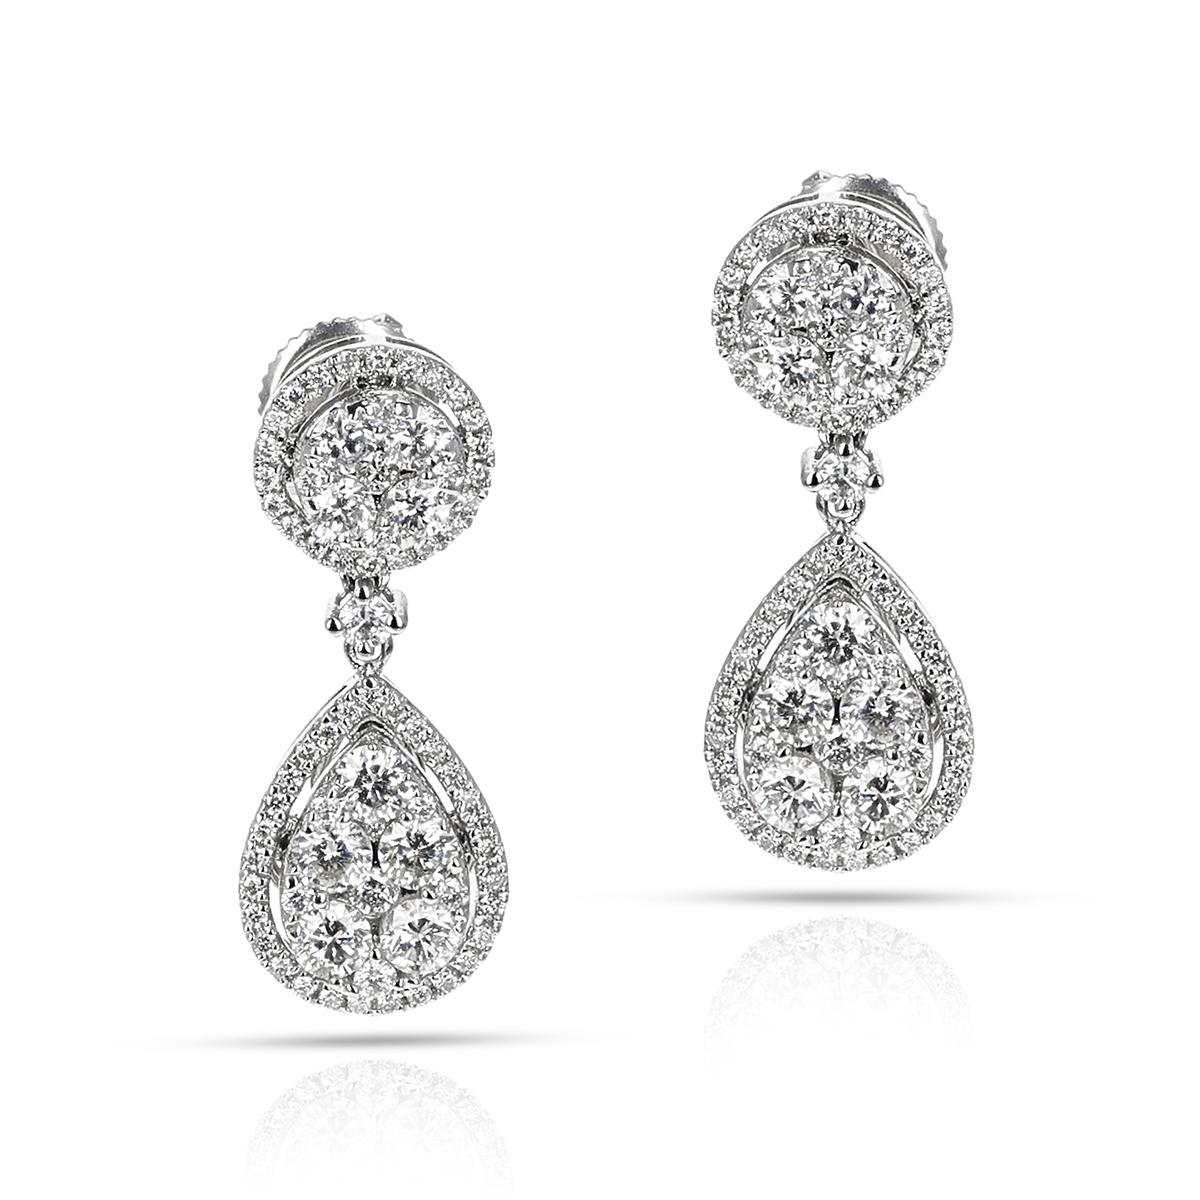 A pair of Round Diamond in Circular and Pear Shape Dangling Earrings made in 14 Karat White Gold. The total weight of the earrings is 4.19 grams. The appx. weight of the diamonds is 1.75 carats.